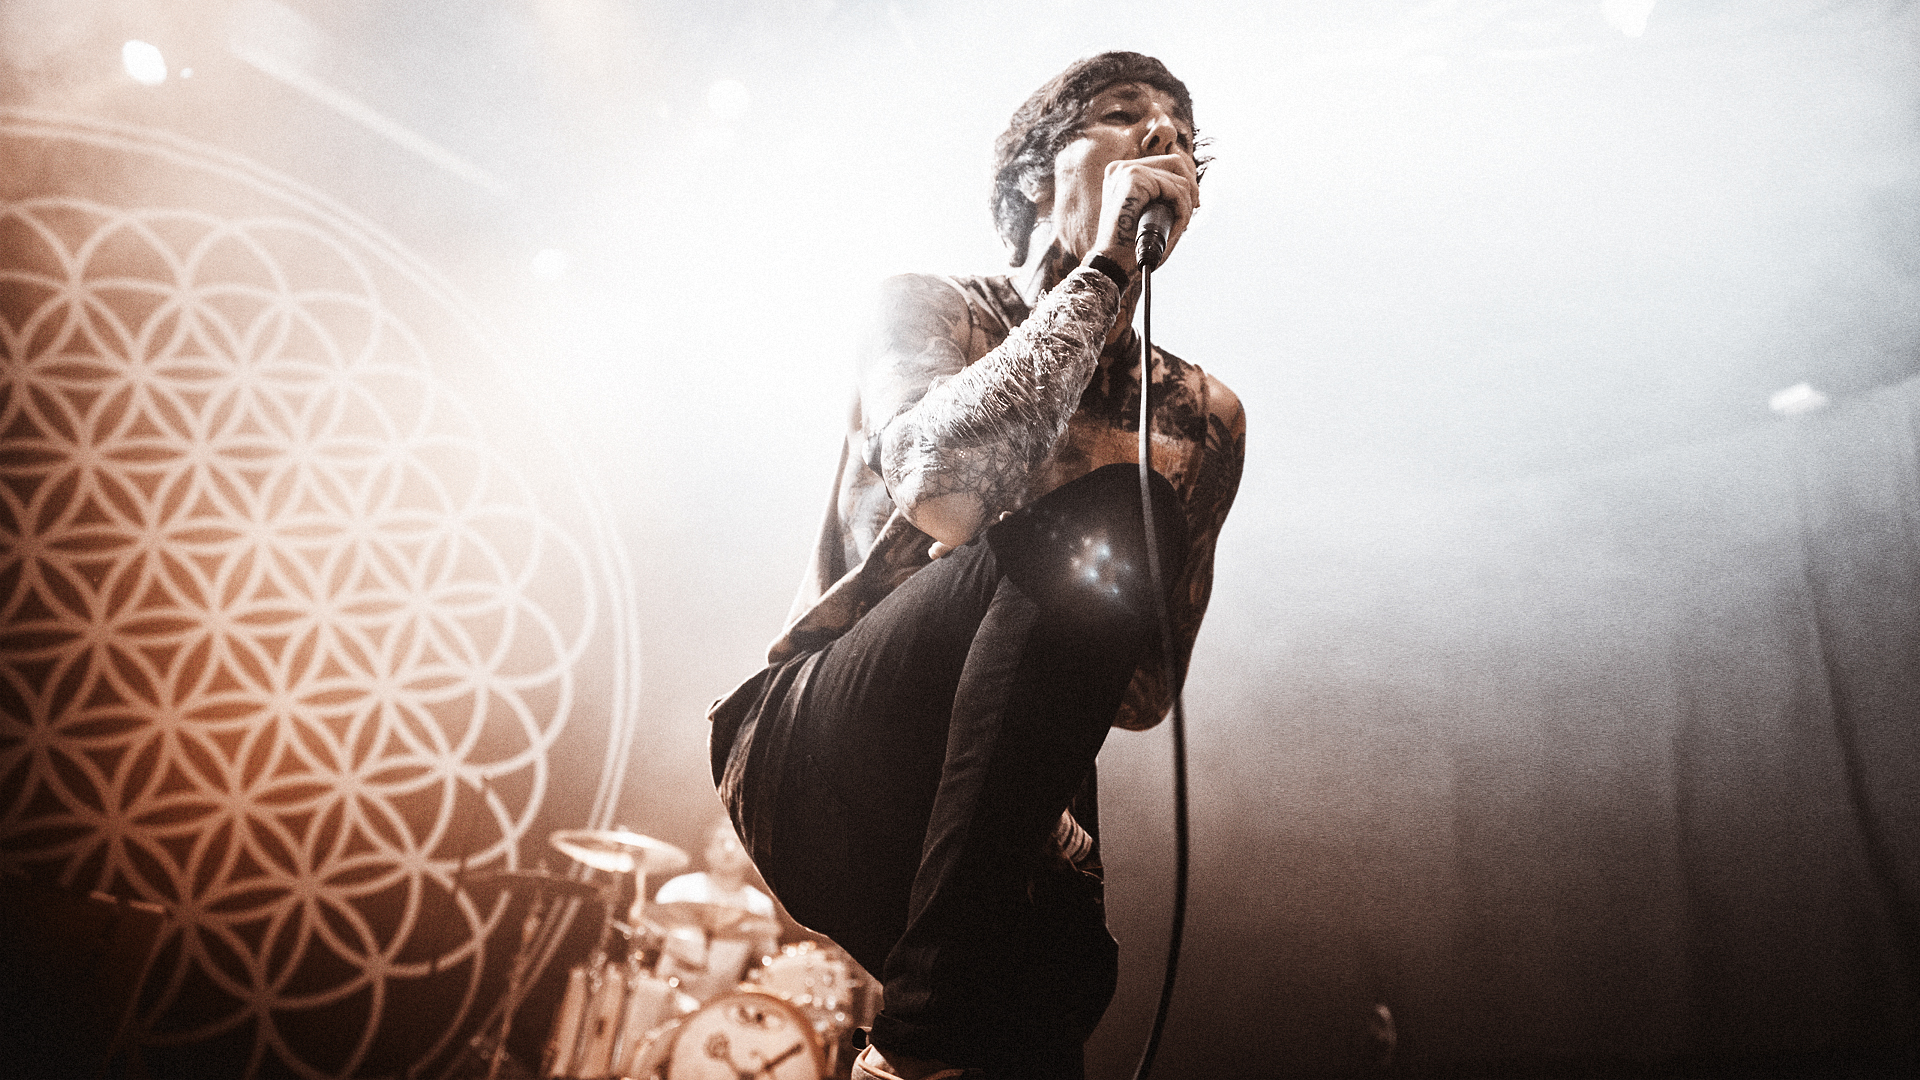 bmth wallpaper hd,performance,music,musician,performing arts,concert